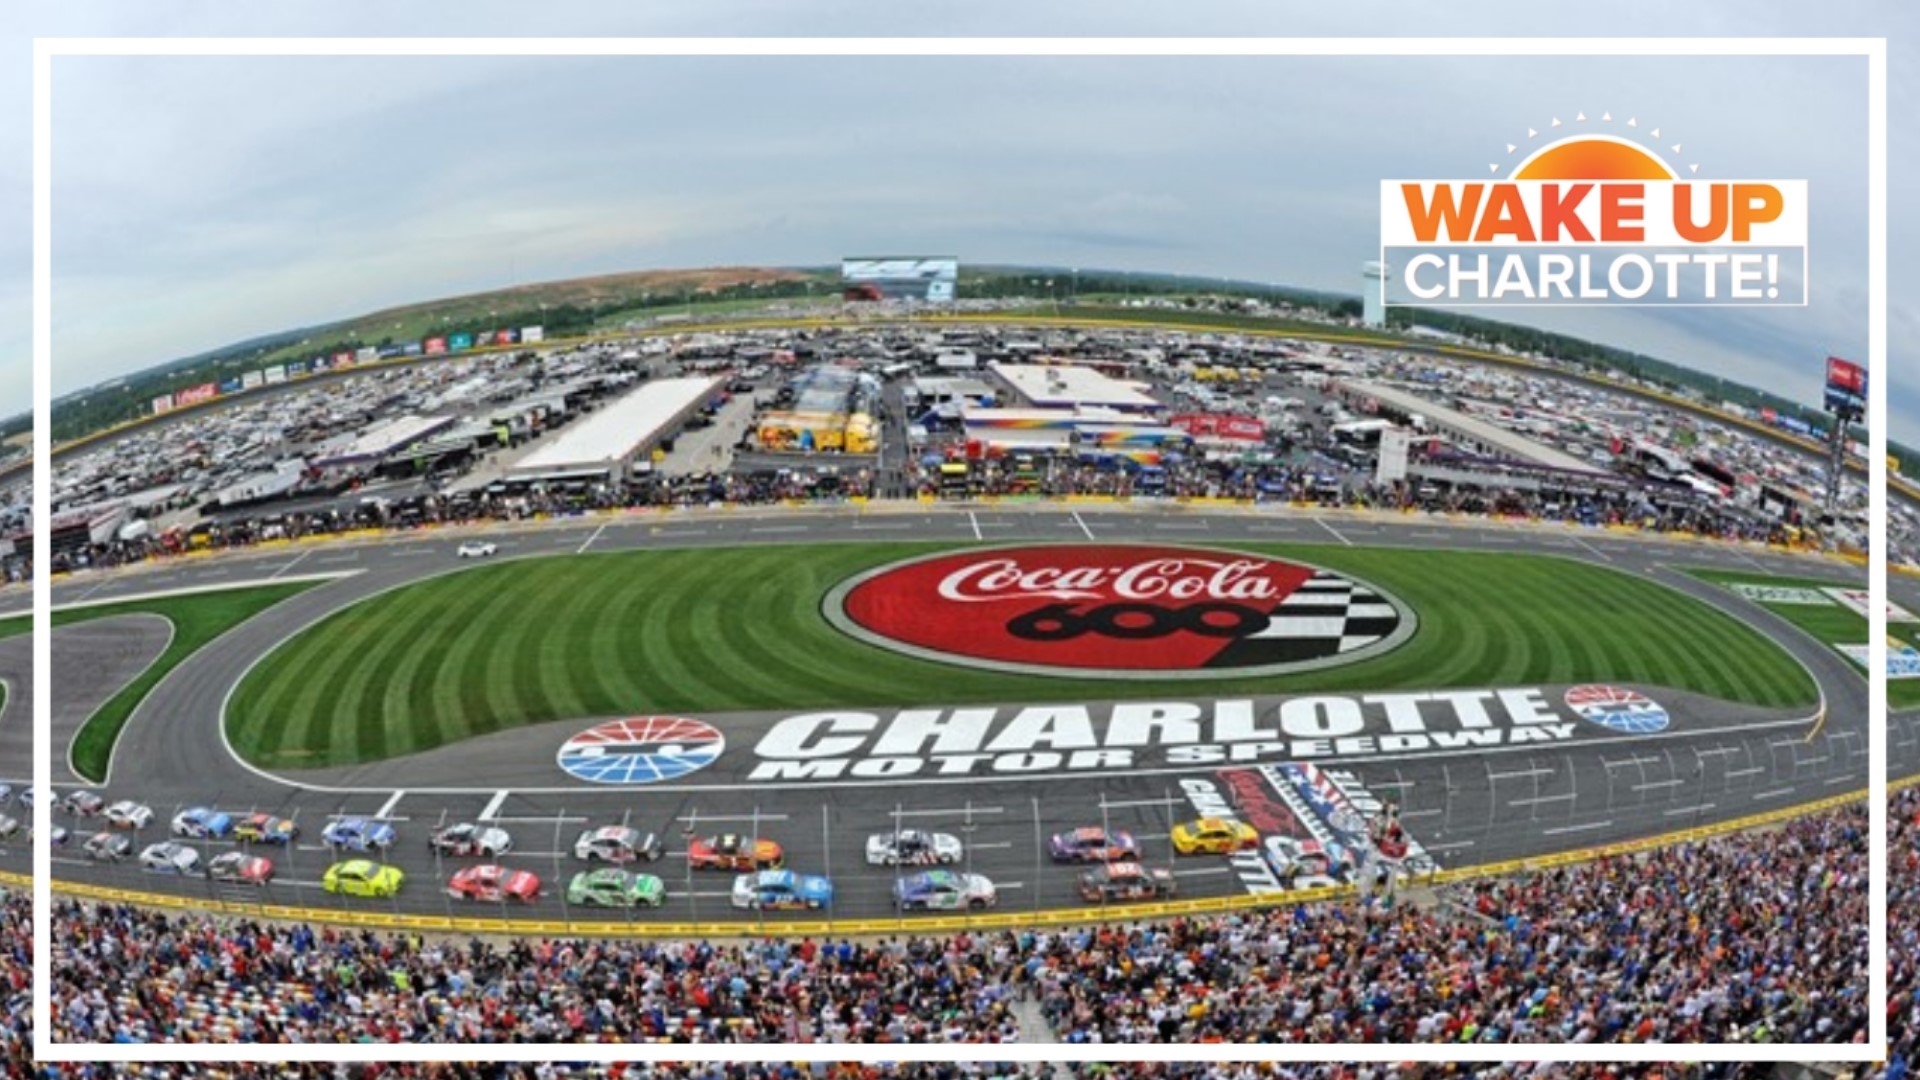 NASCAR's Memorial Day tradition returns to Charlotte Motor Speedway with a sellout crowd expected at the Coca-Cola 600.